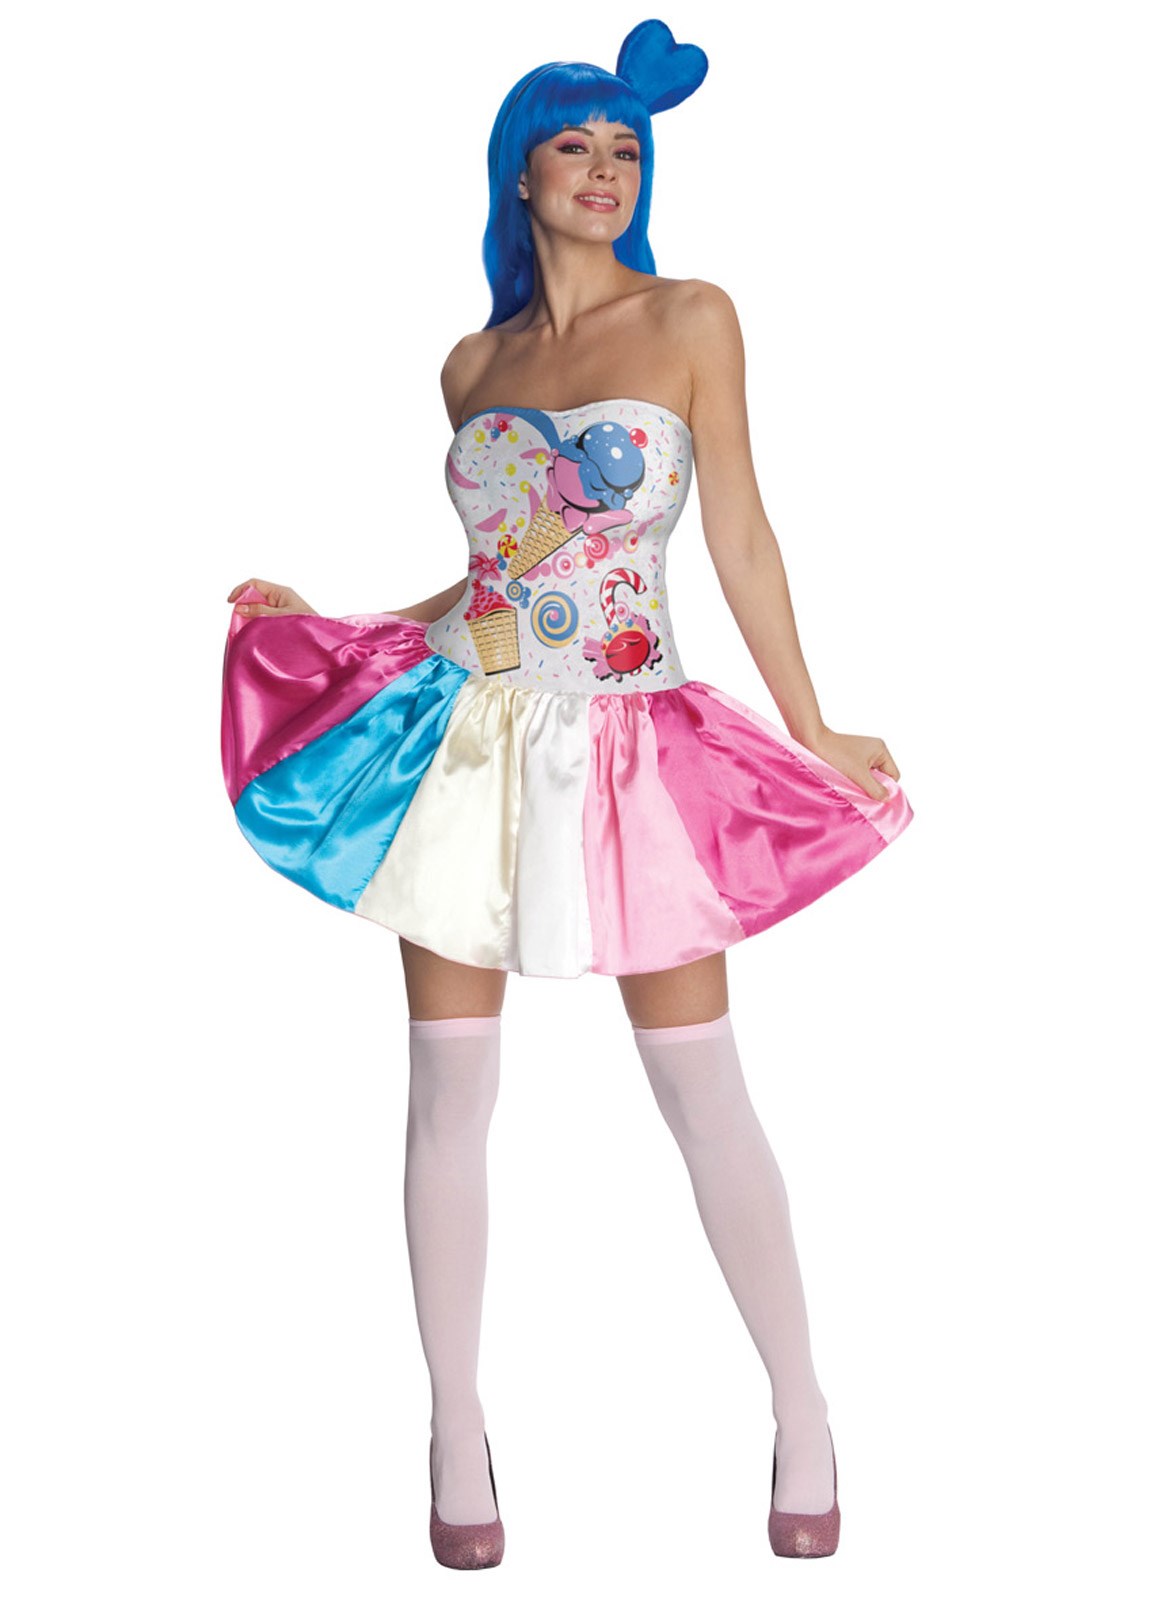 Katy Perry Candy Girl Adult Costume